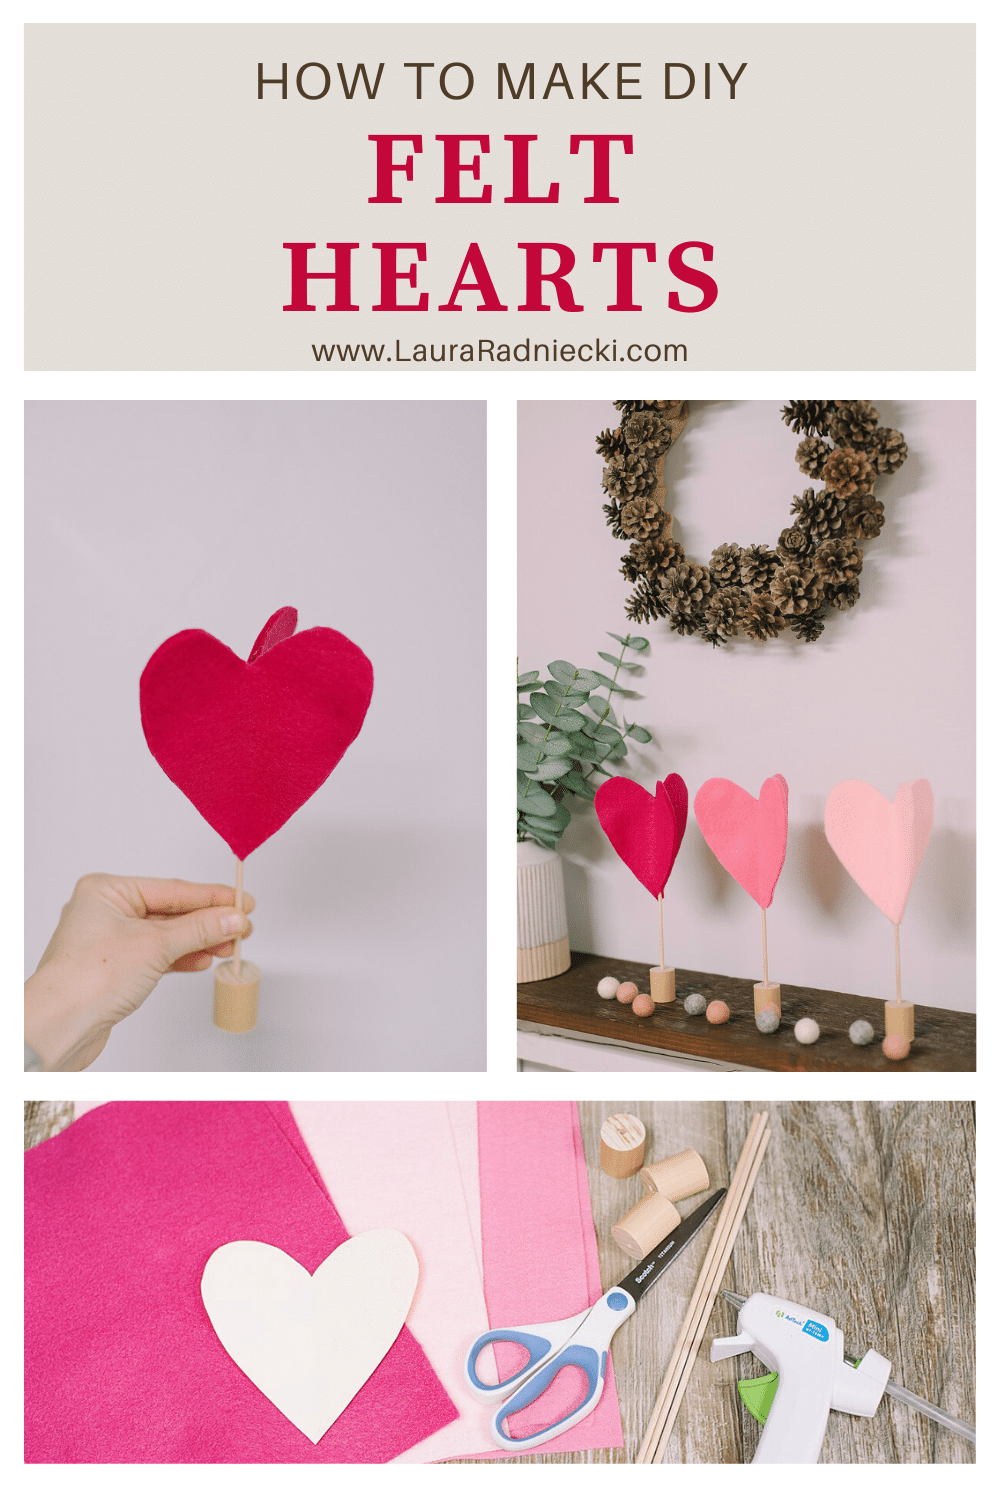 How to Make Felt Hearts for Valentine's Day